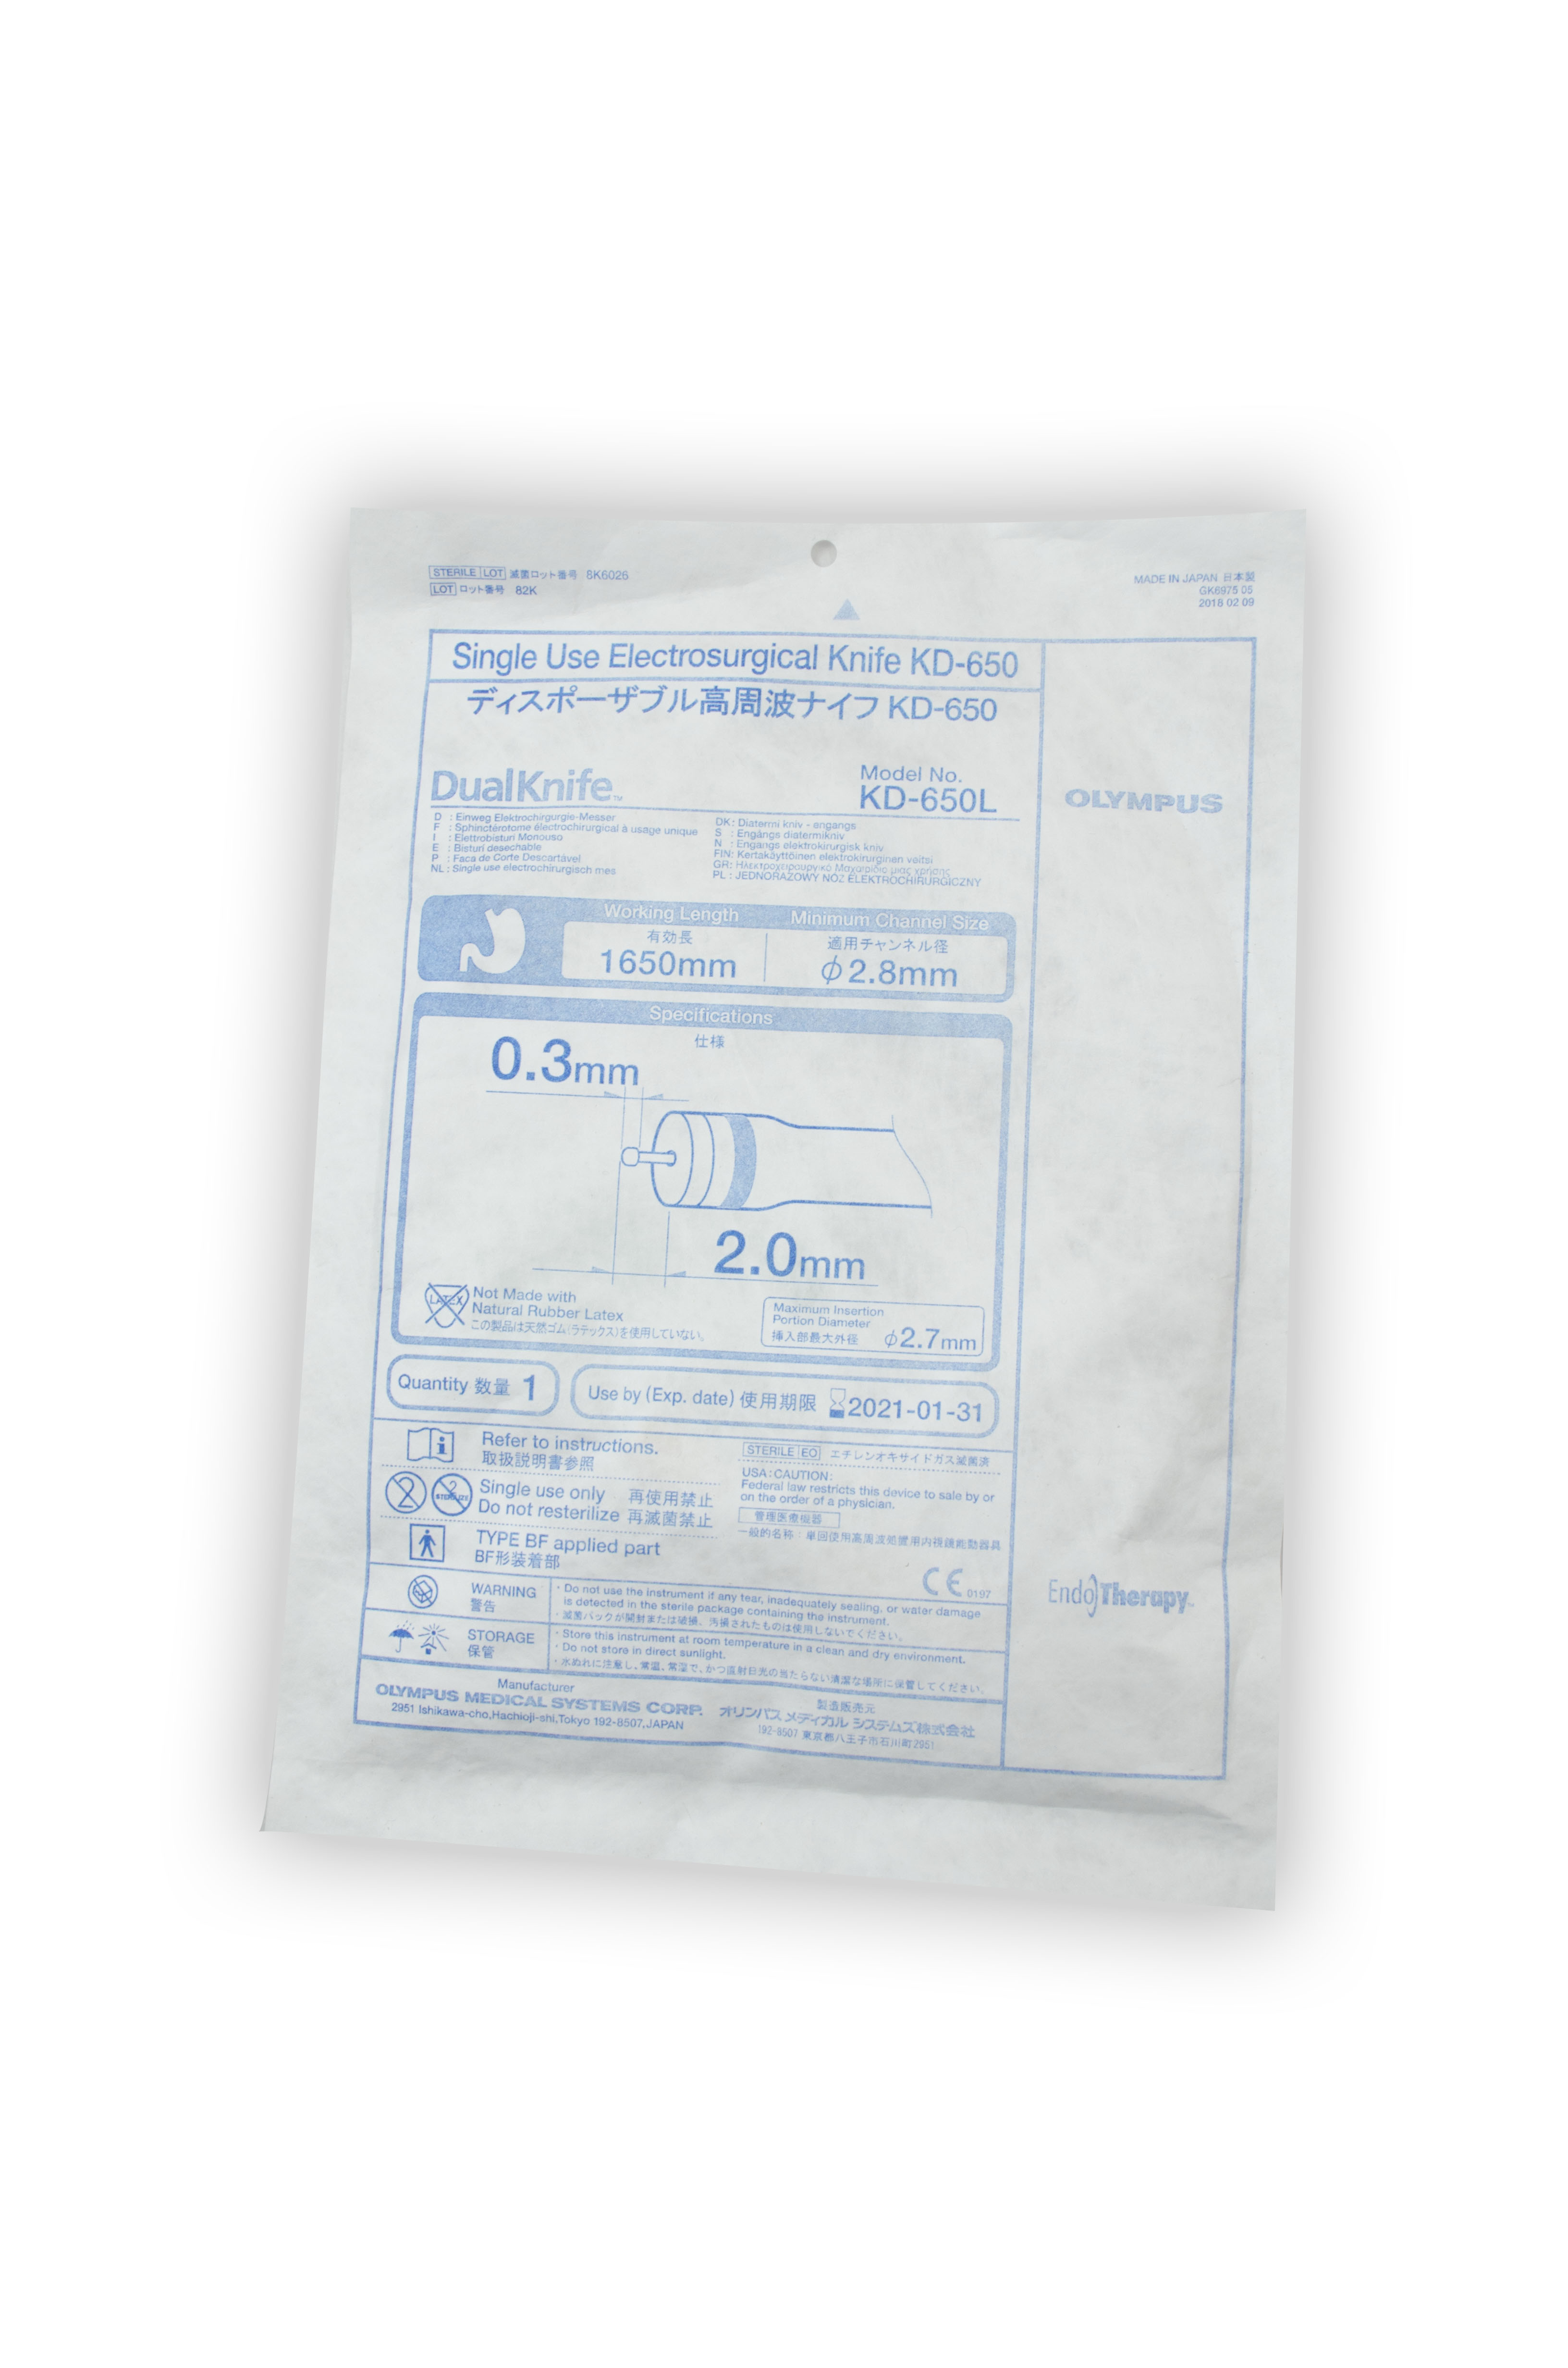 [Out-of-Date] Olympus Disposable Sphincterotome - KD-650L